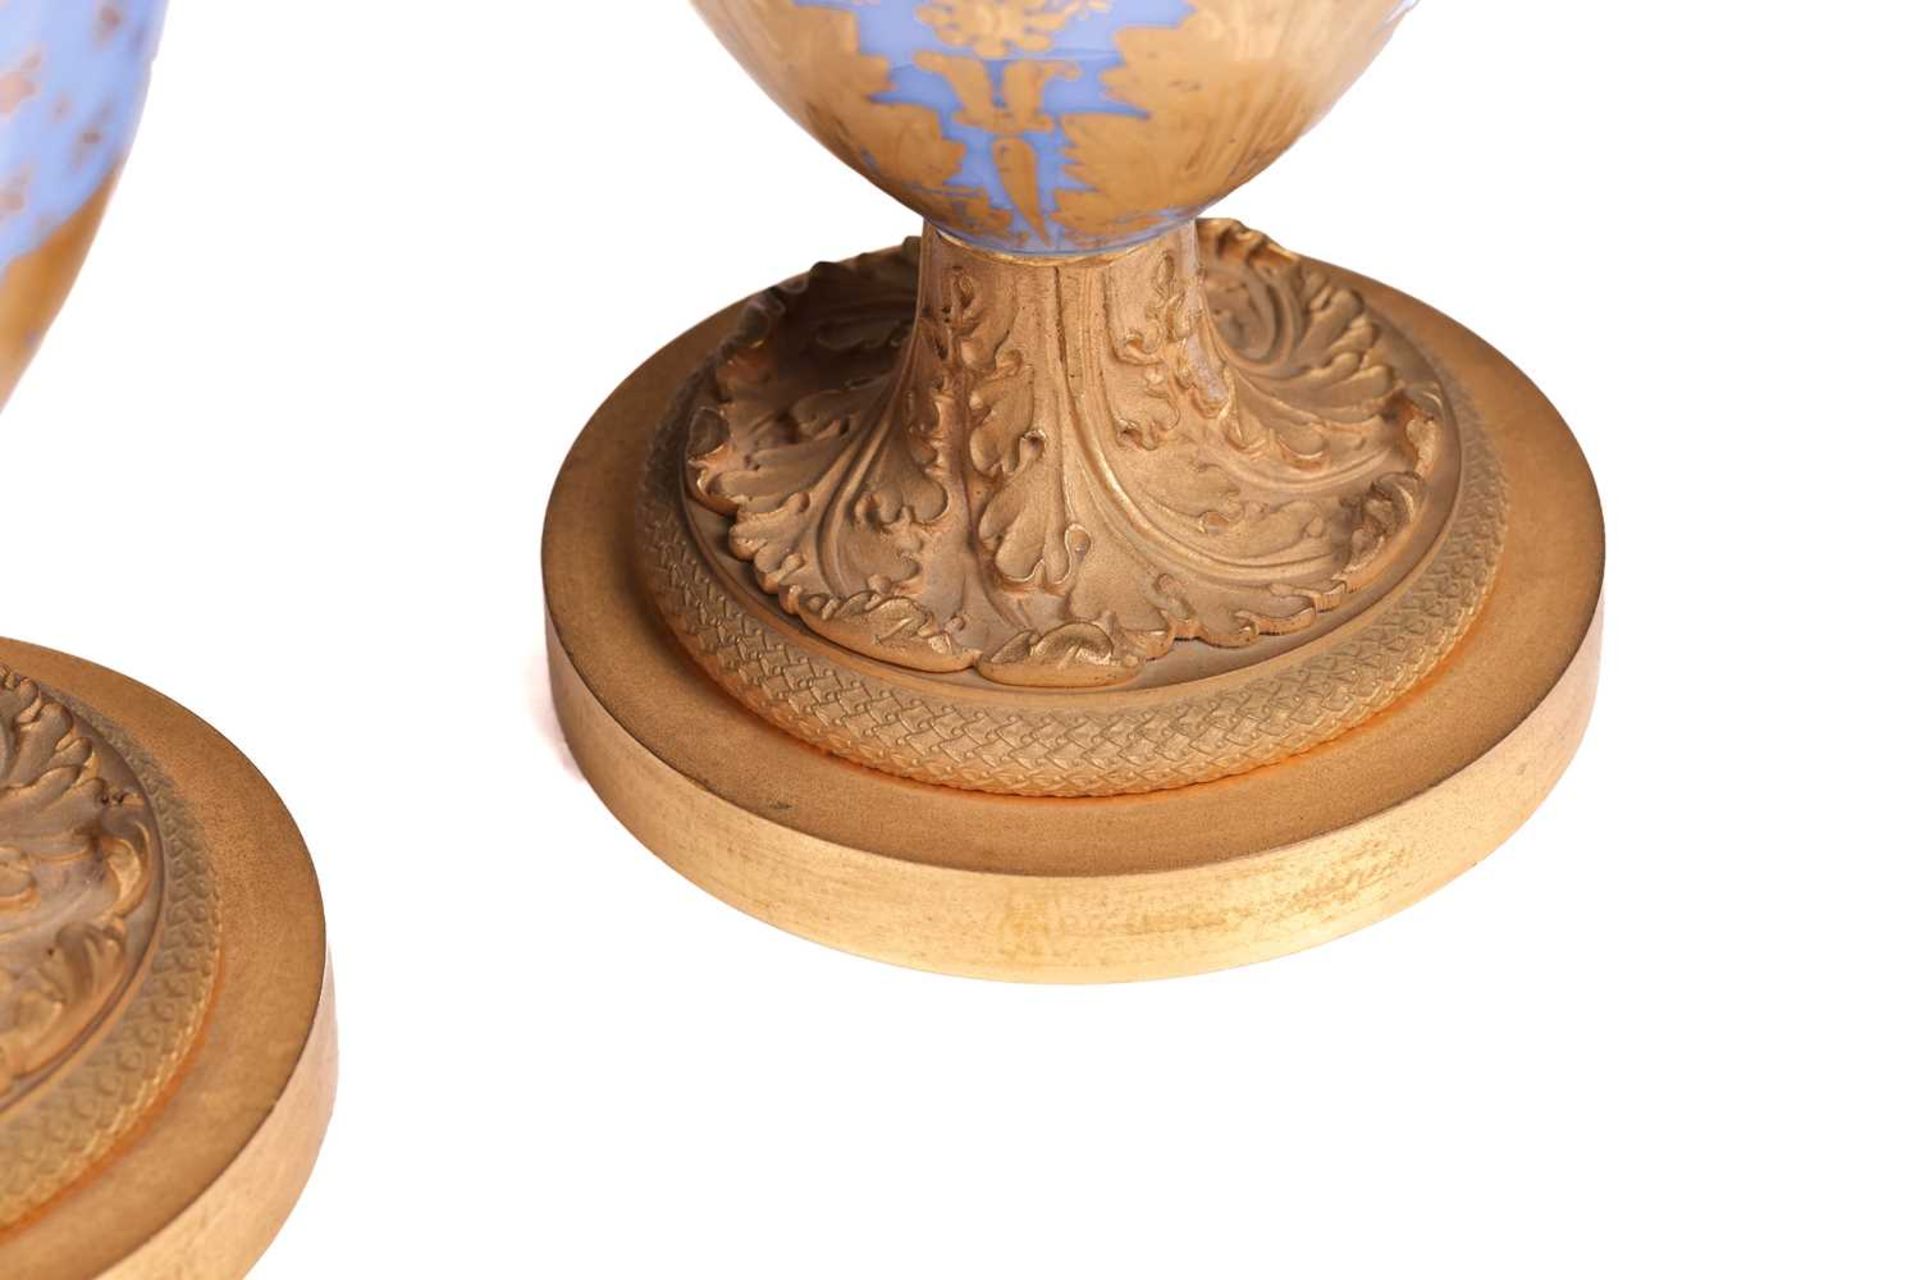 A pair of late 19th century French blue opaline glass and ormolu mounted vases, with gilt-overlaid d - Image 4 of 7